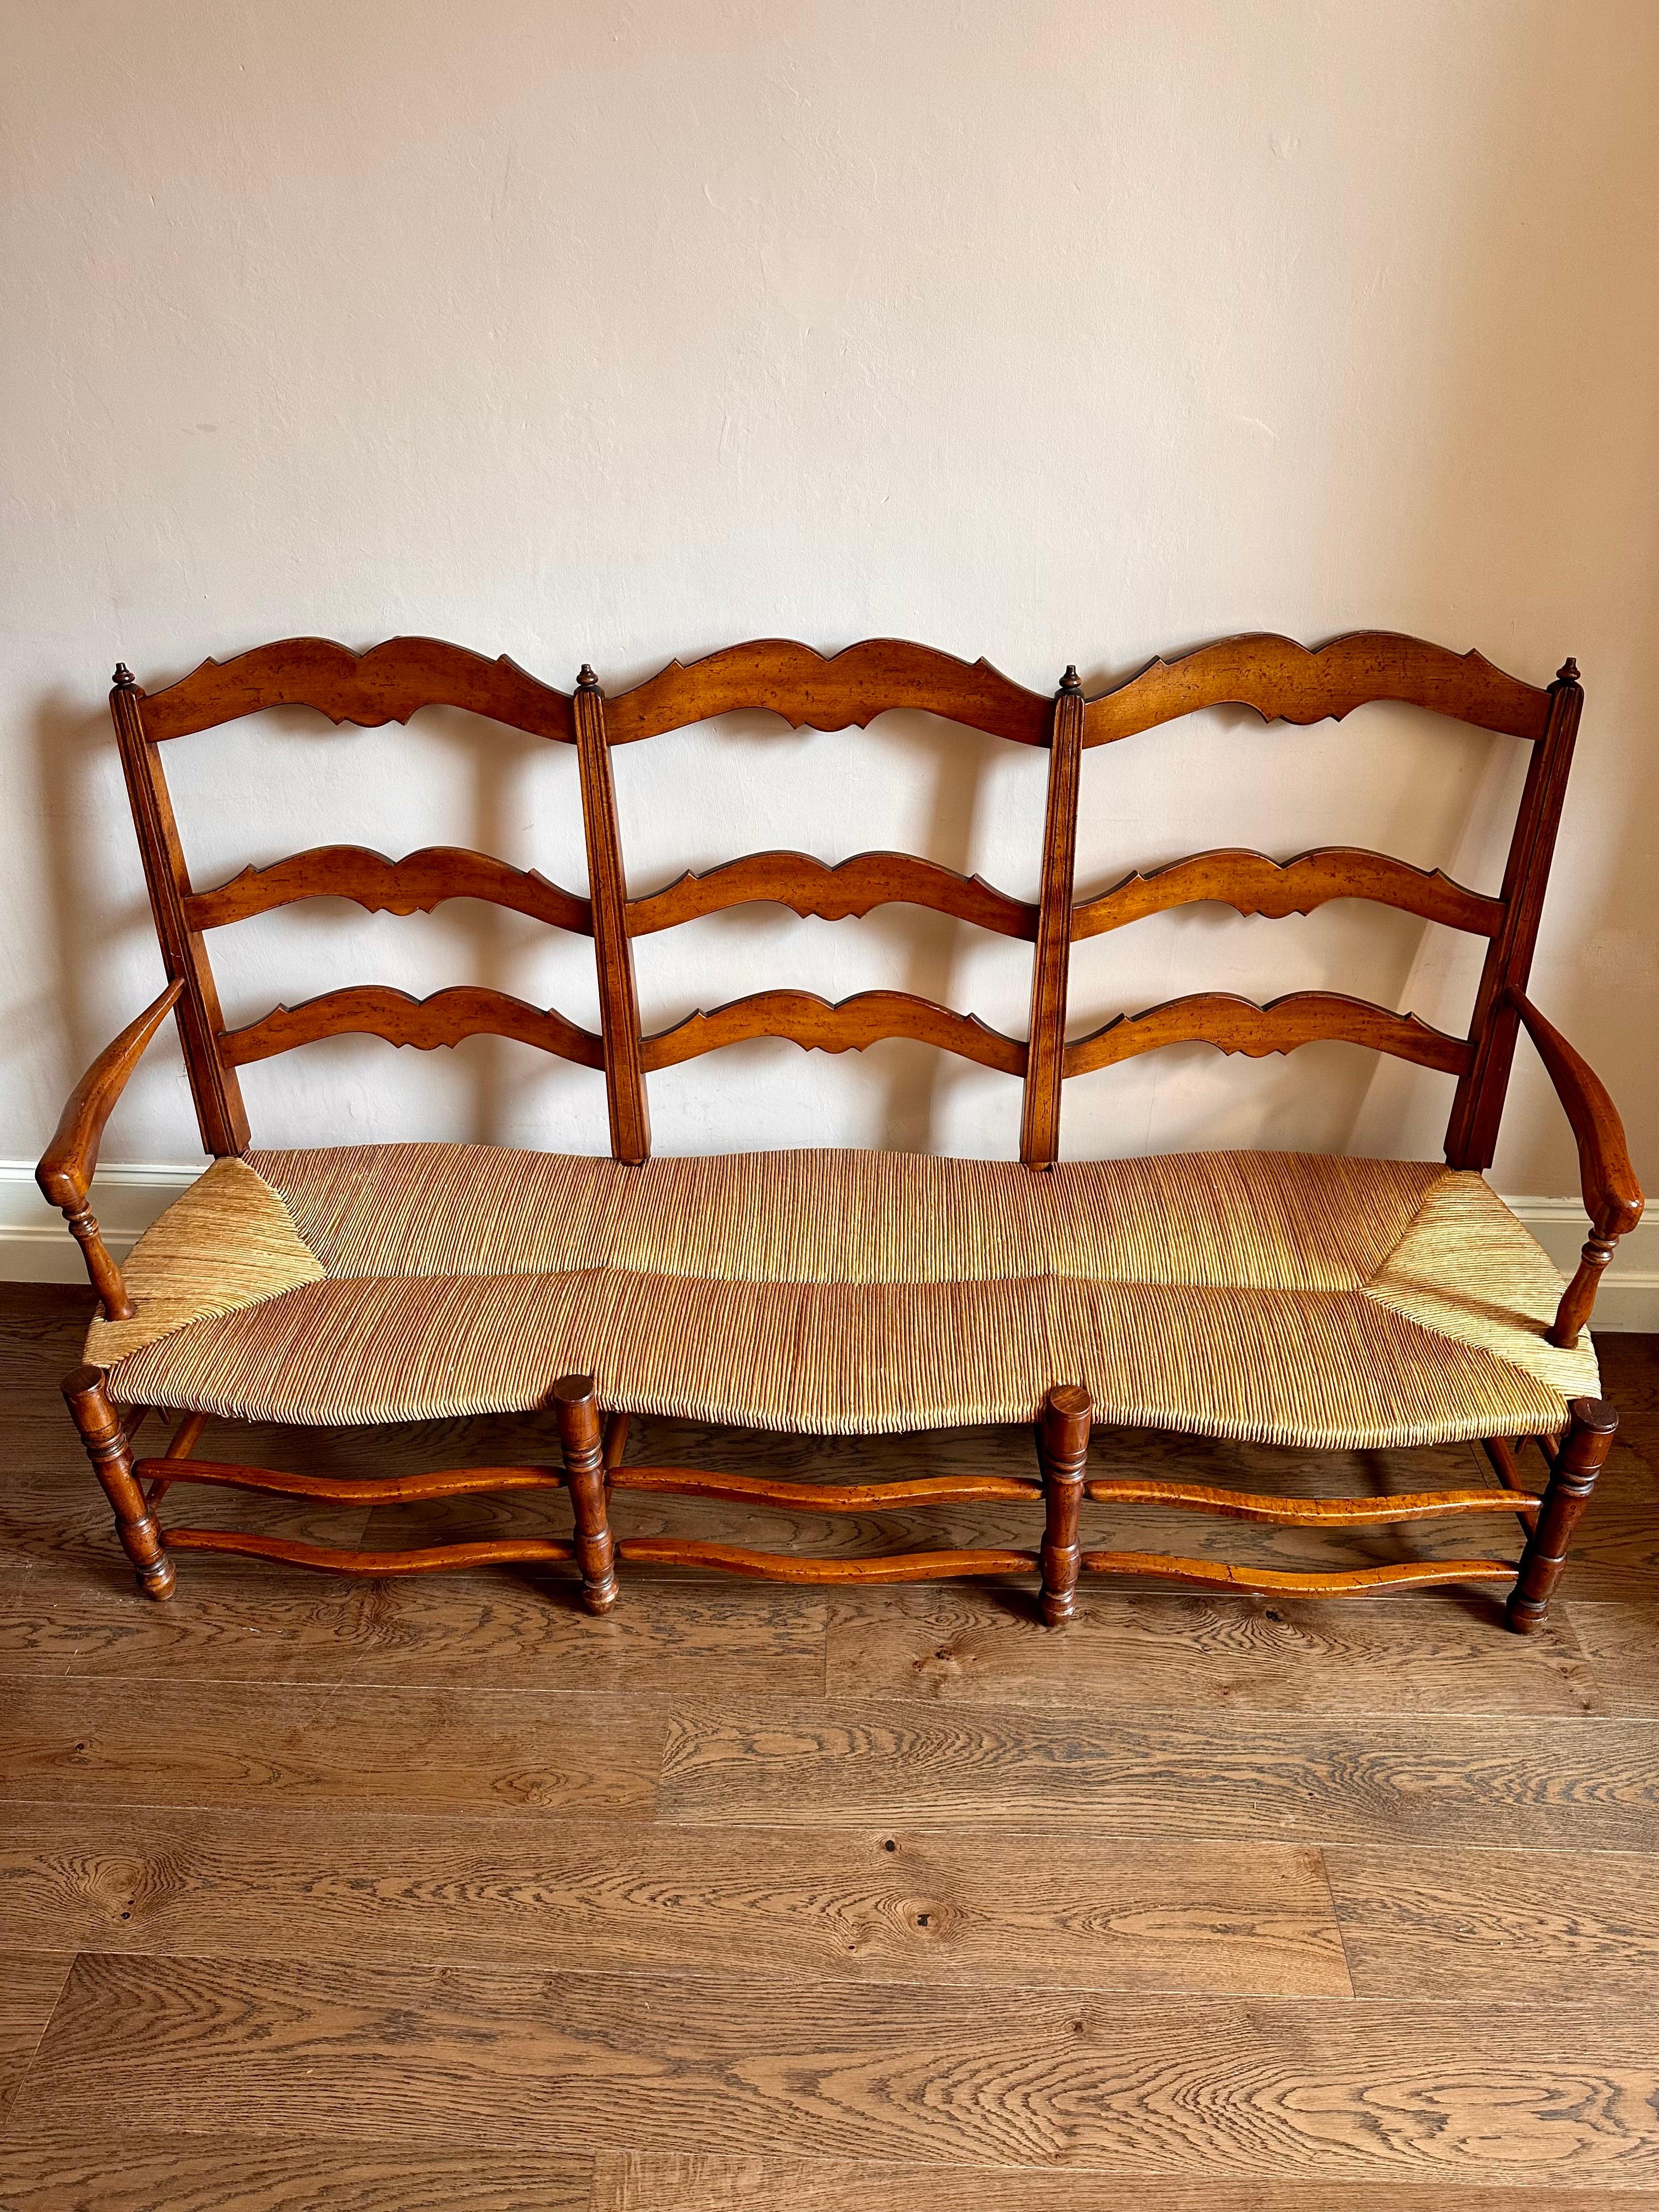 French Provincial Large C19th Provencal Cherry Wood Rush Seat Bench For Sale